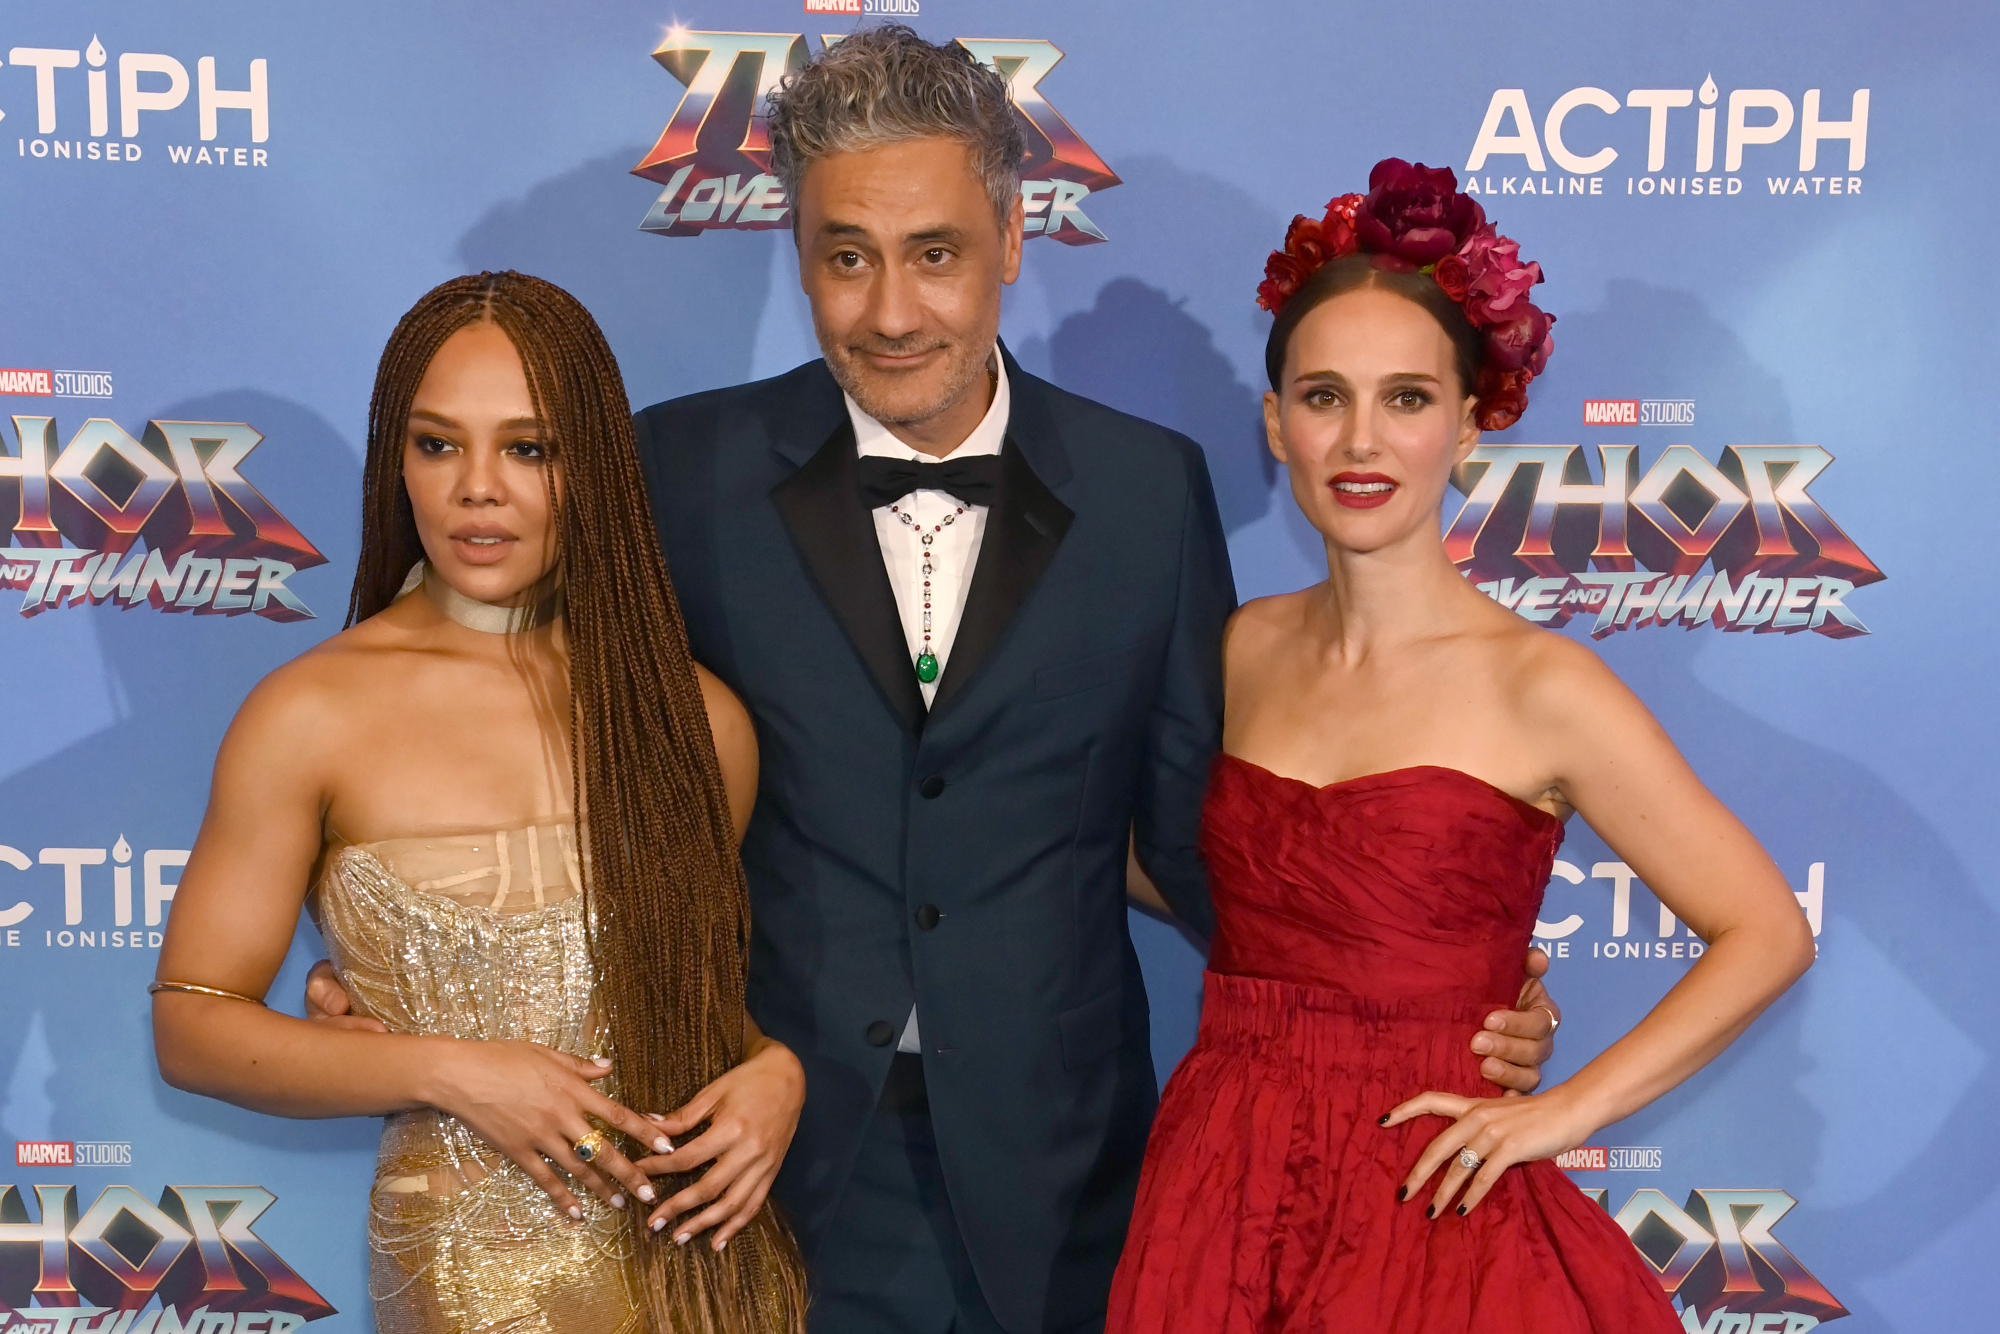 'Thor: Love and Thunder' stars Tessa Thompson, Taika Waititi, and Natalie Portman posing in front of a step and repeat for the movie. Thompson and Portman wear dresses, and Waititi wears a tux.